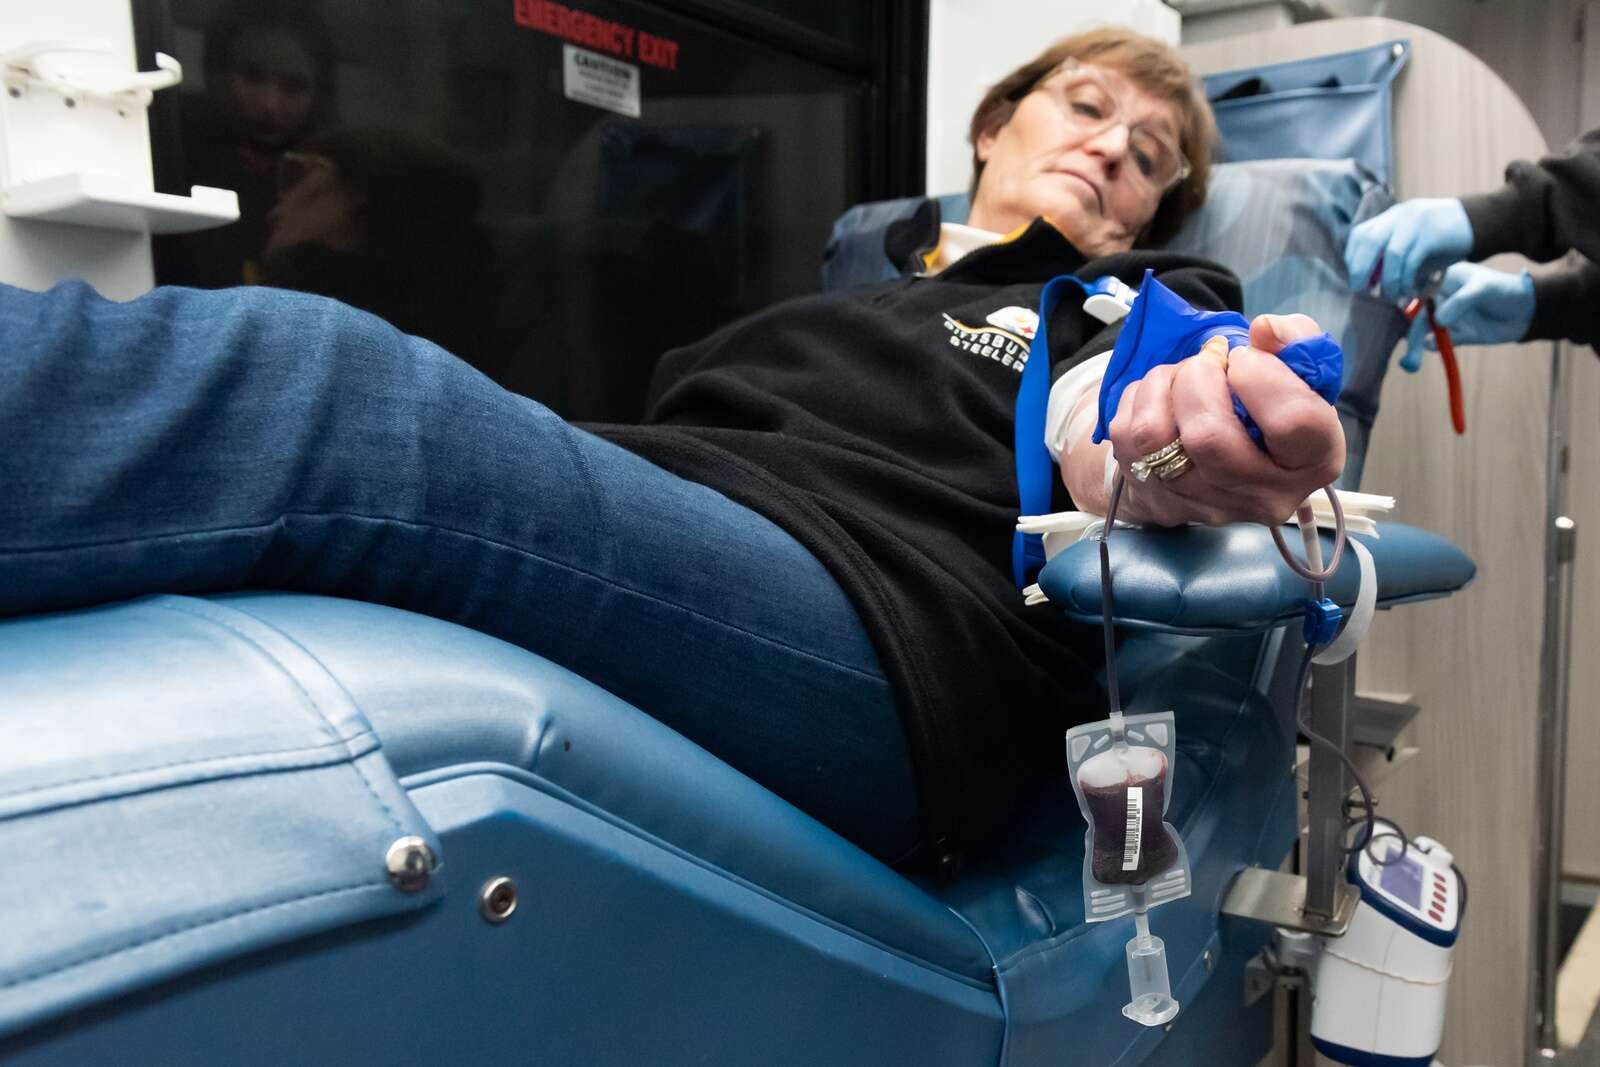 Laura Warmbrod squeezes a stress ball while donating blood